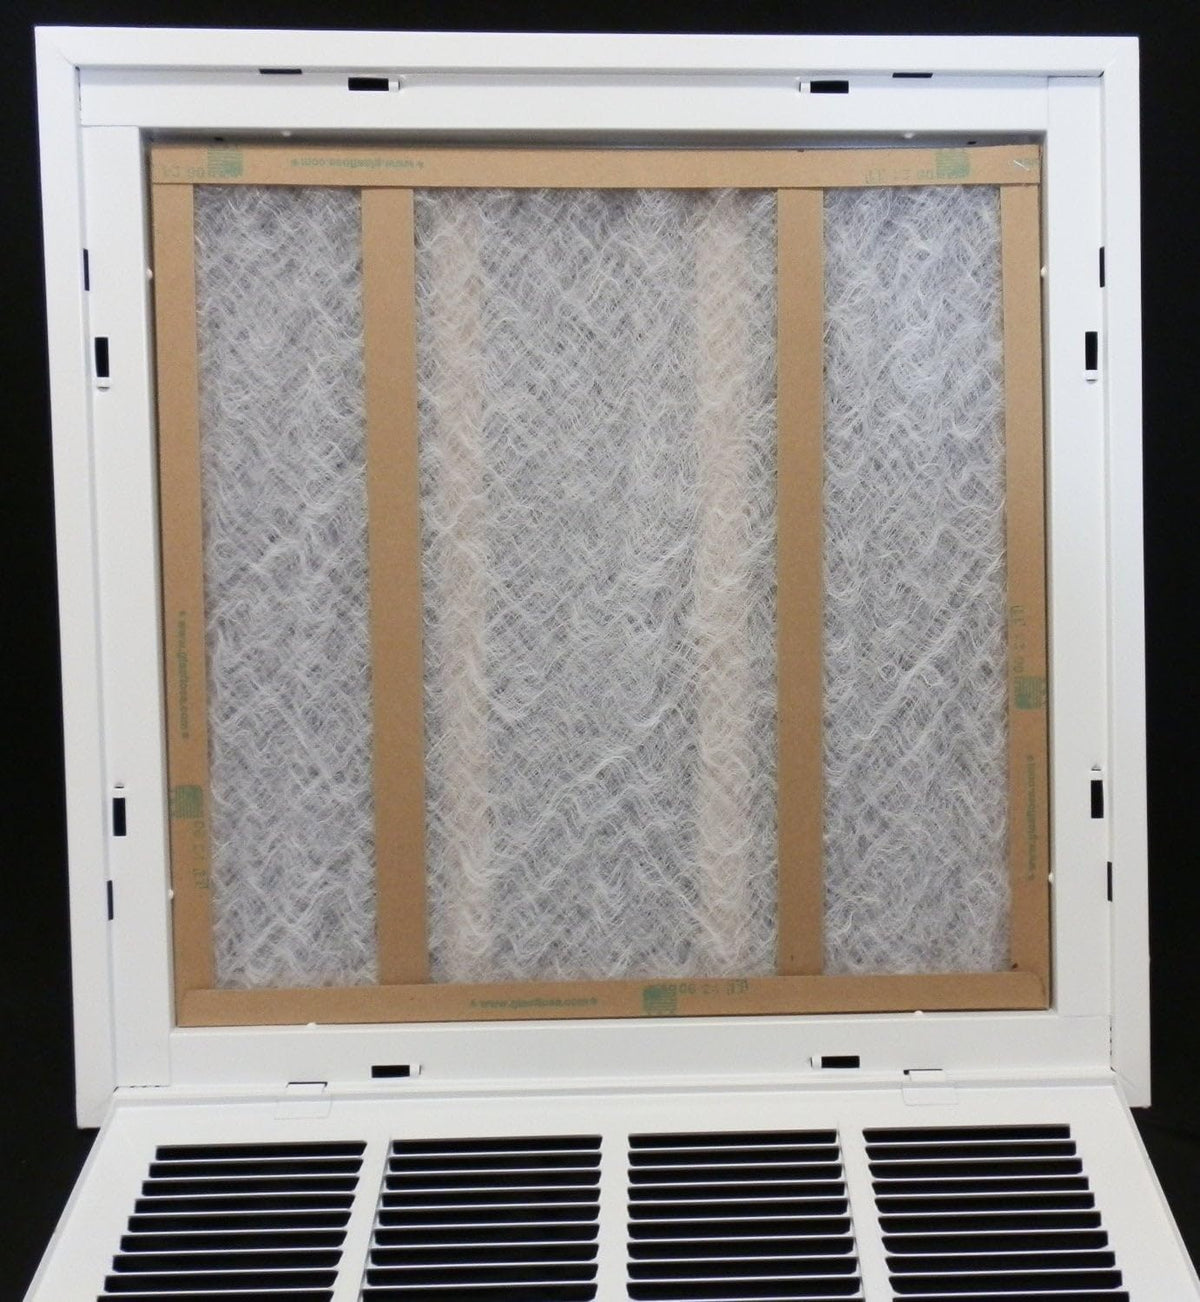 26&quot; X 16&quot; Steel Return Air Filter Grille for 1&quot; Filter - Fixed Hinged - [Outer Dimensions: 28 5/8&quot; X 18 5/8&quot;]